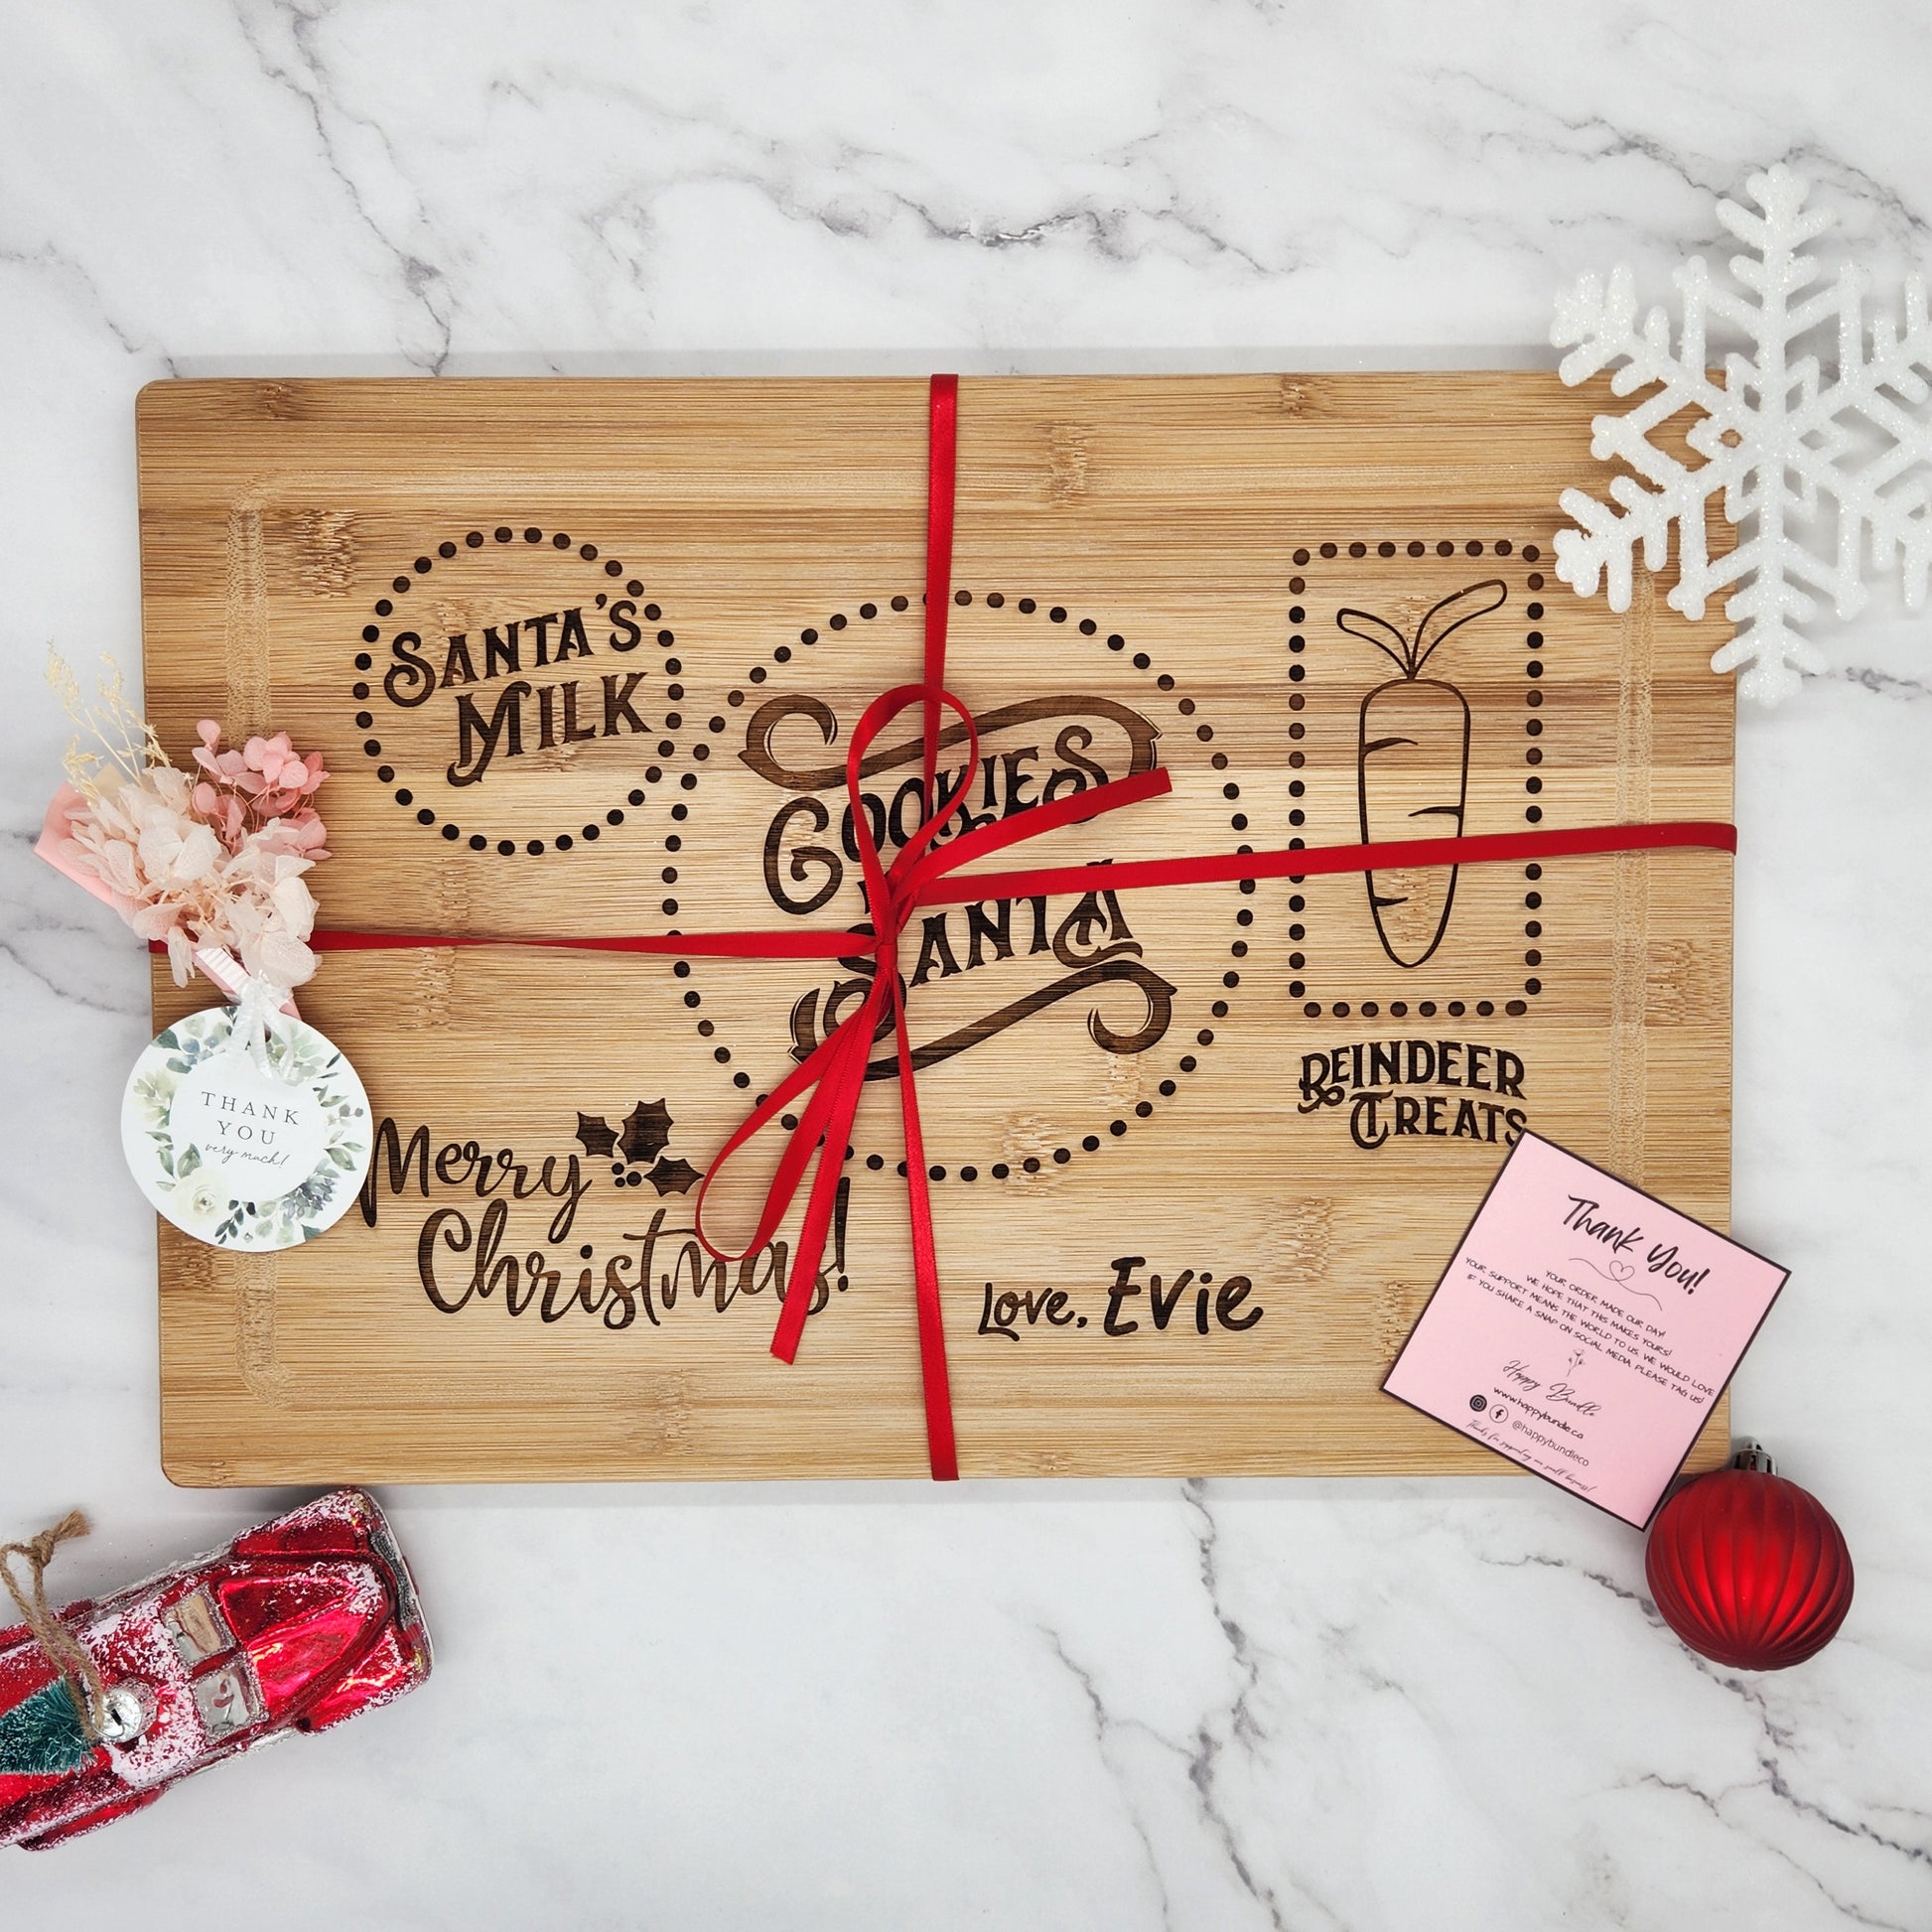 Personalized Christmas Board | Dear Santa Cookie Tray, Milk and Cookies| Christmas Cheese Platters | Santa Charcuterie Board - HappyBundle